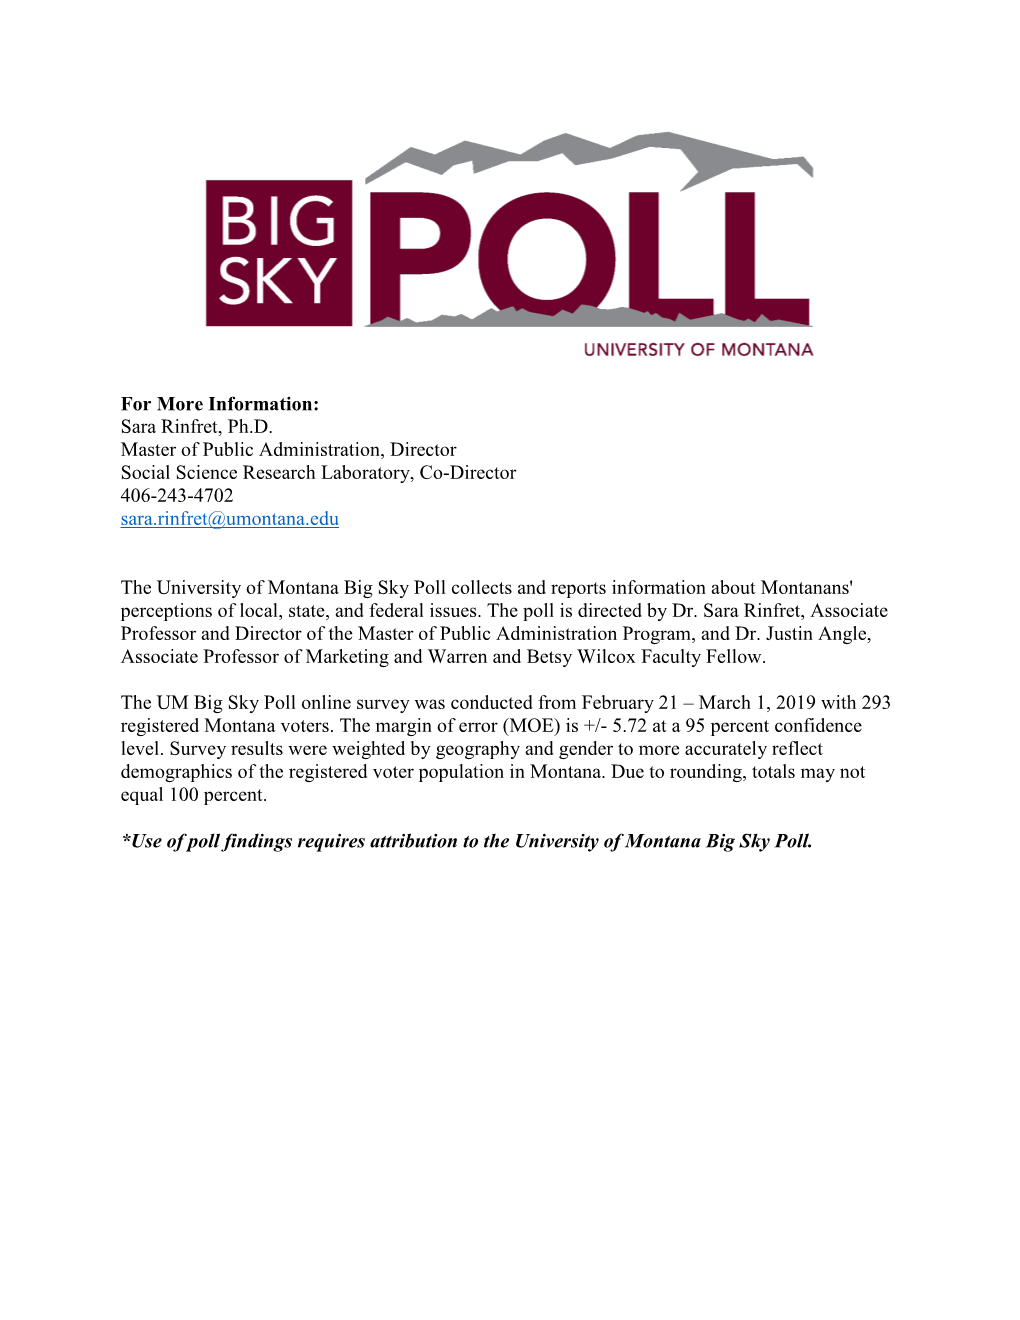 Big Sky Poll Collects and Reports Information About Montanans' Perceptions of Local, State, and Federal Issues